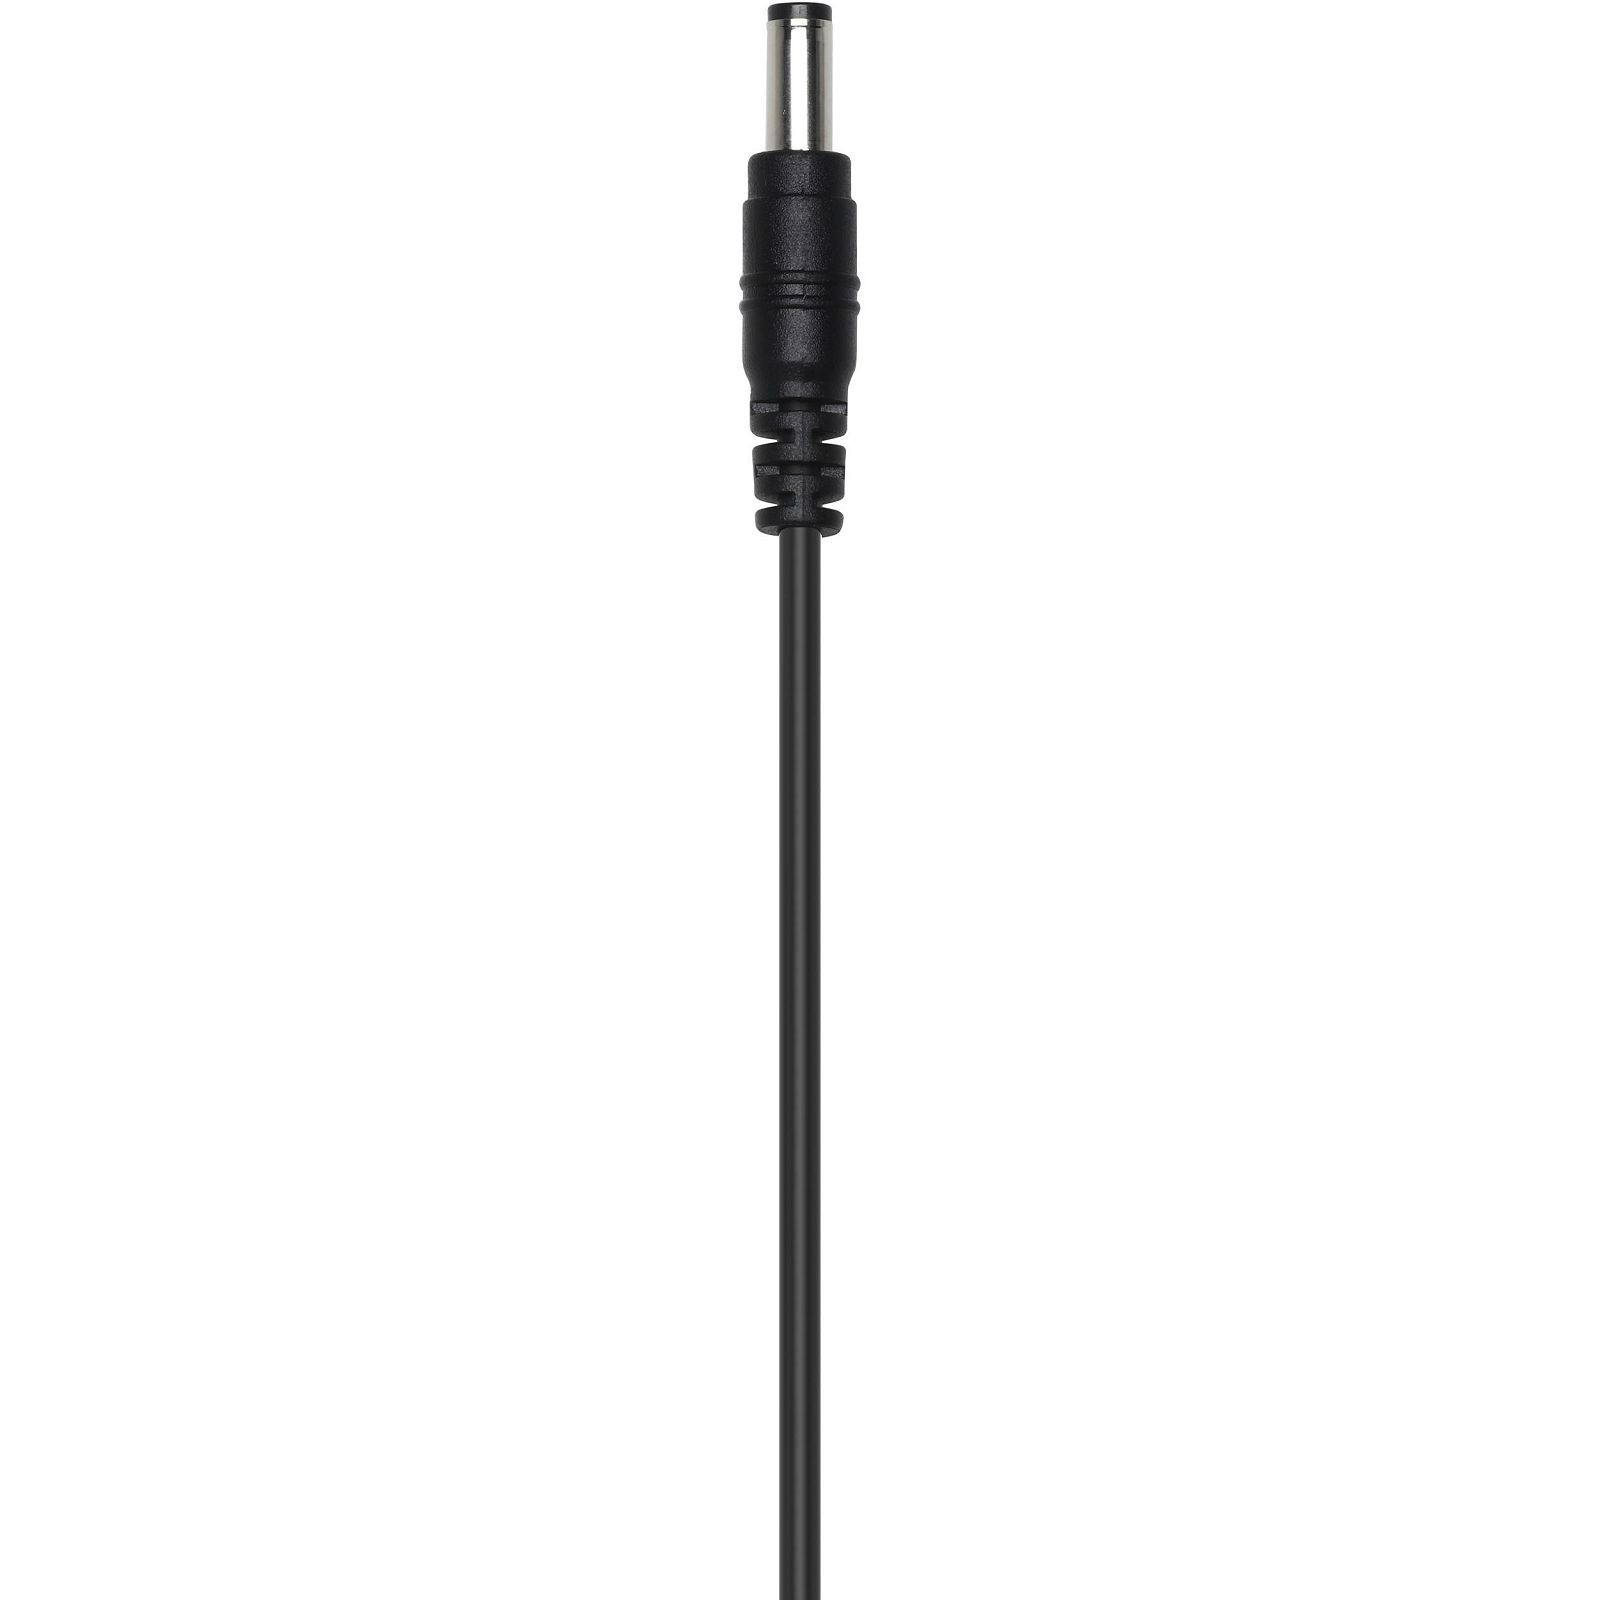 DJI Ronin-S Spare Part 09 DC Power Cable (CP.RN.00000015.01)